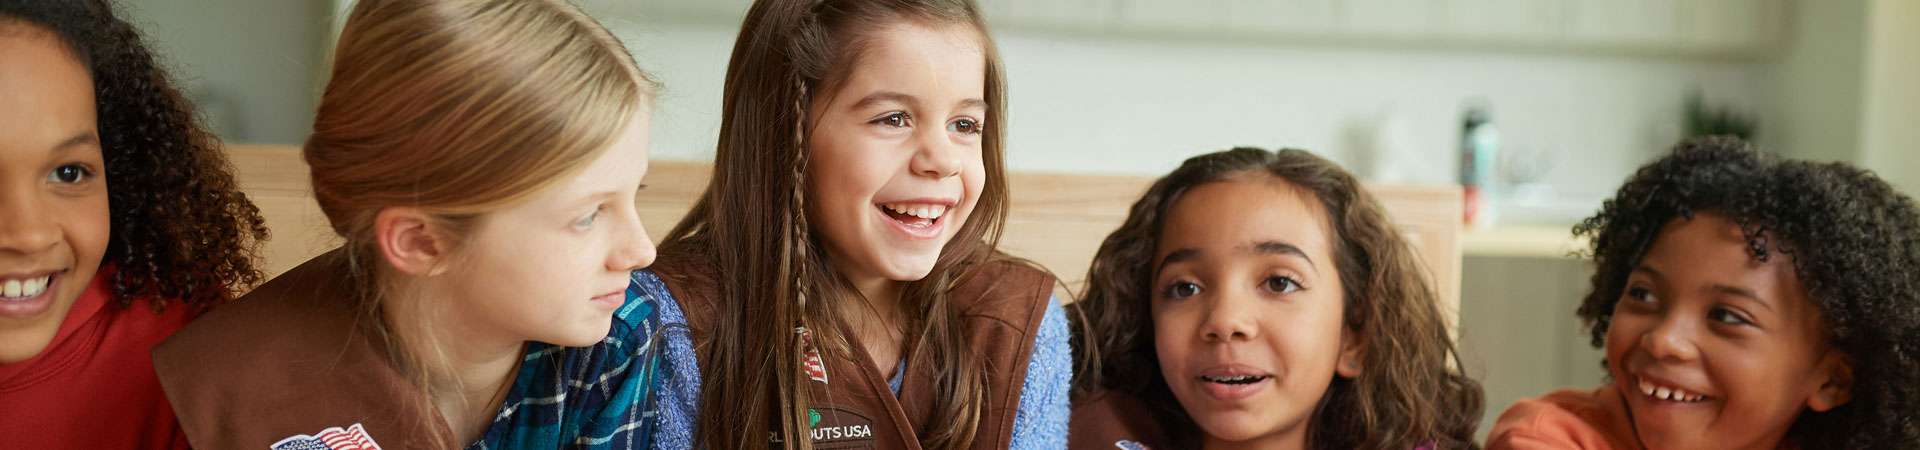  Image Description: Three Girl Scouts wearing brown vests with badges. The Girl Scout in the middle is smiling wide. There is a wooden table in the background. 